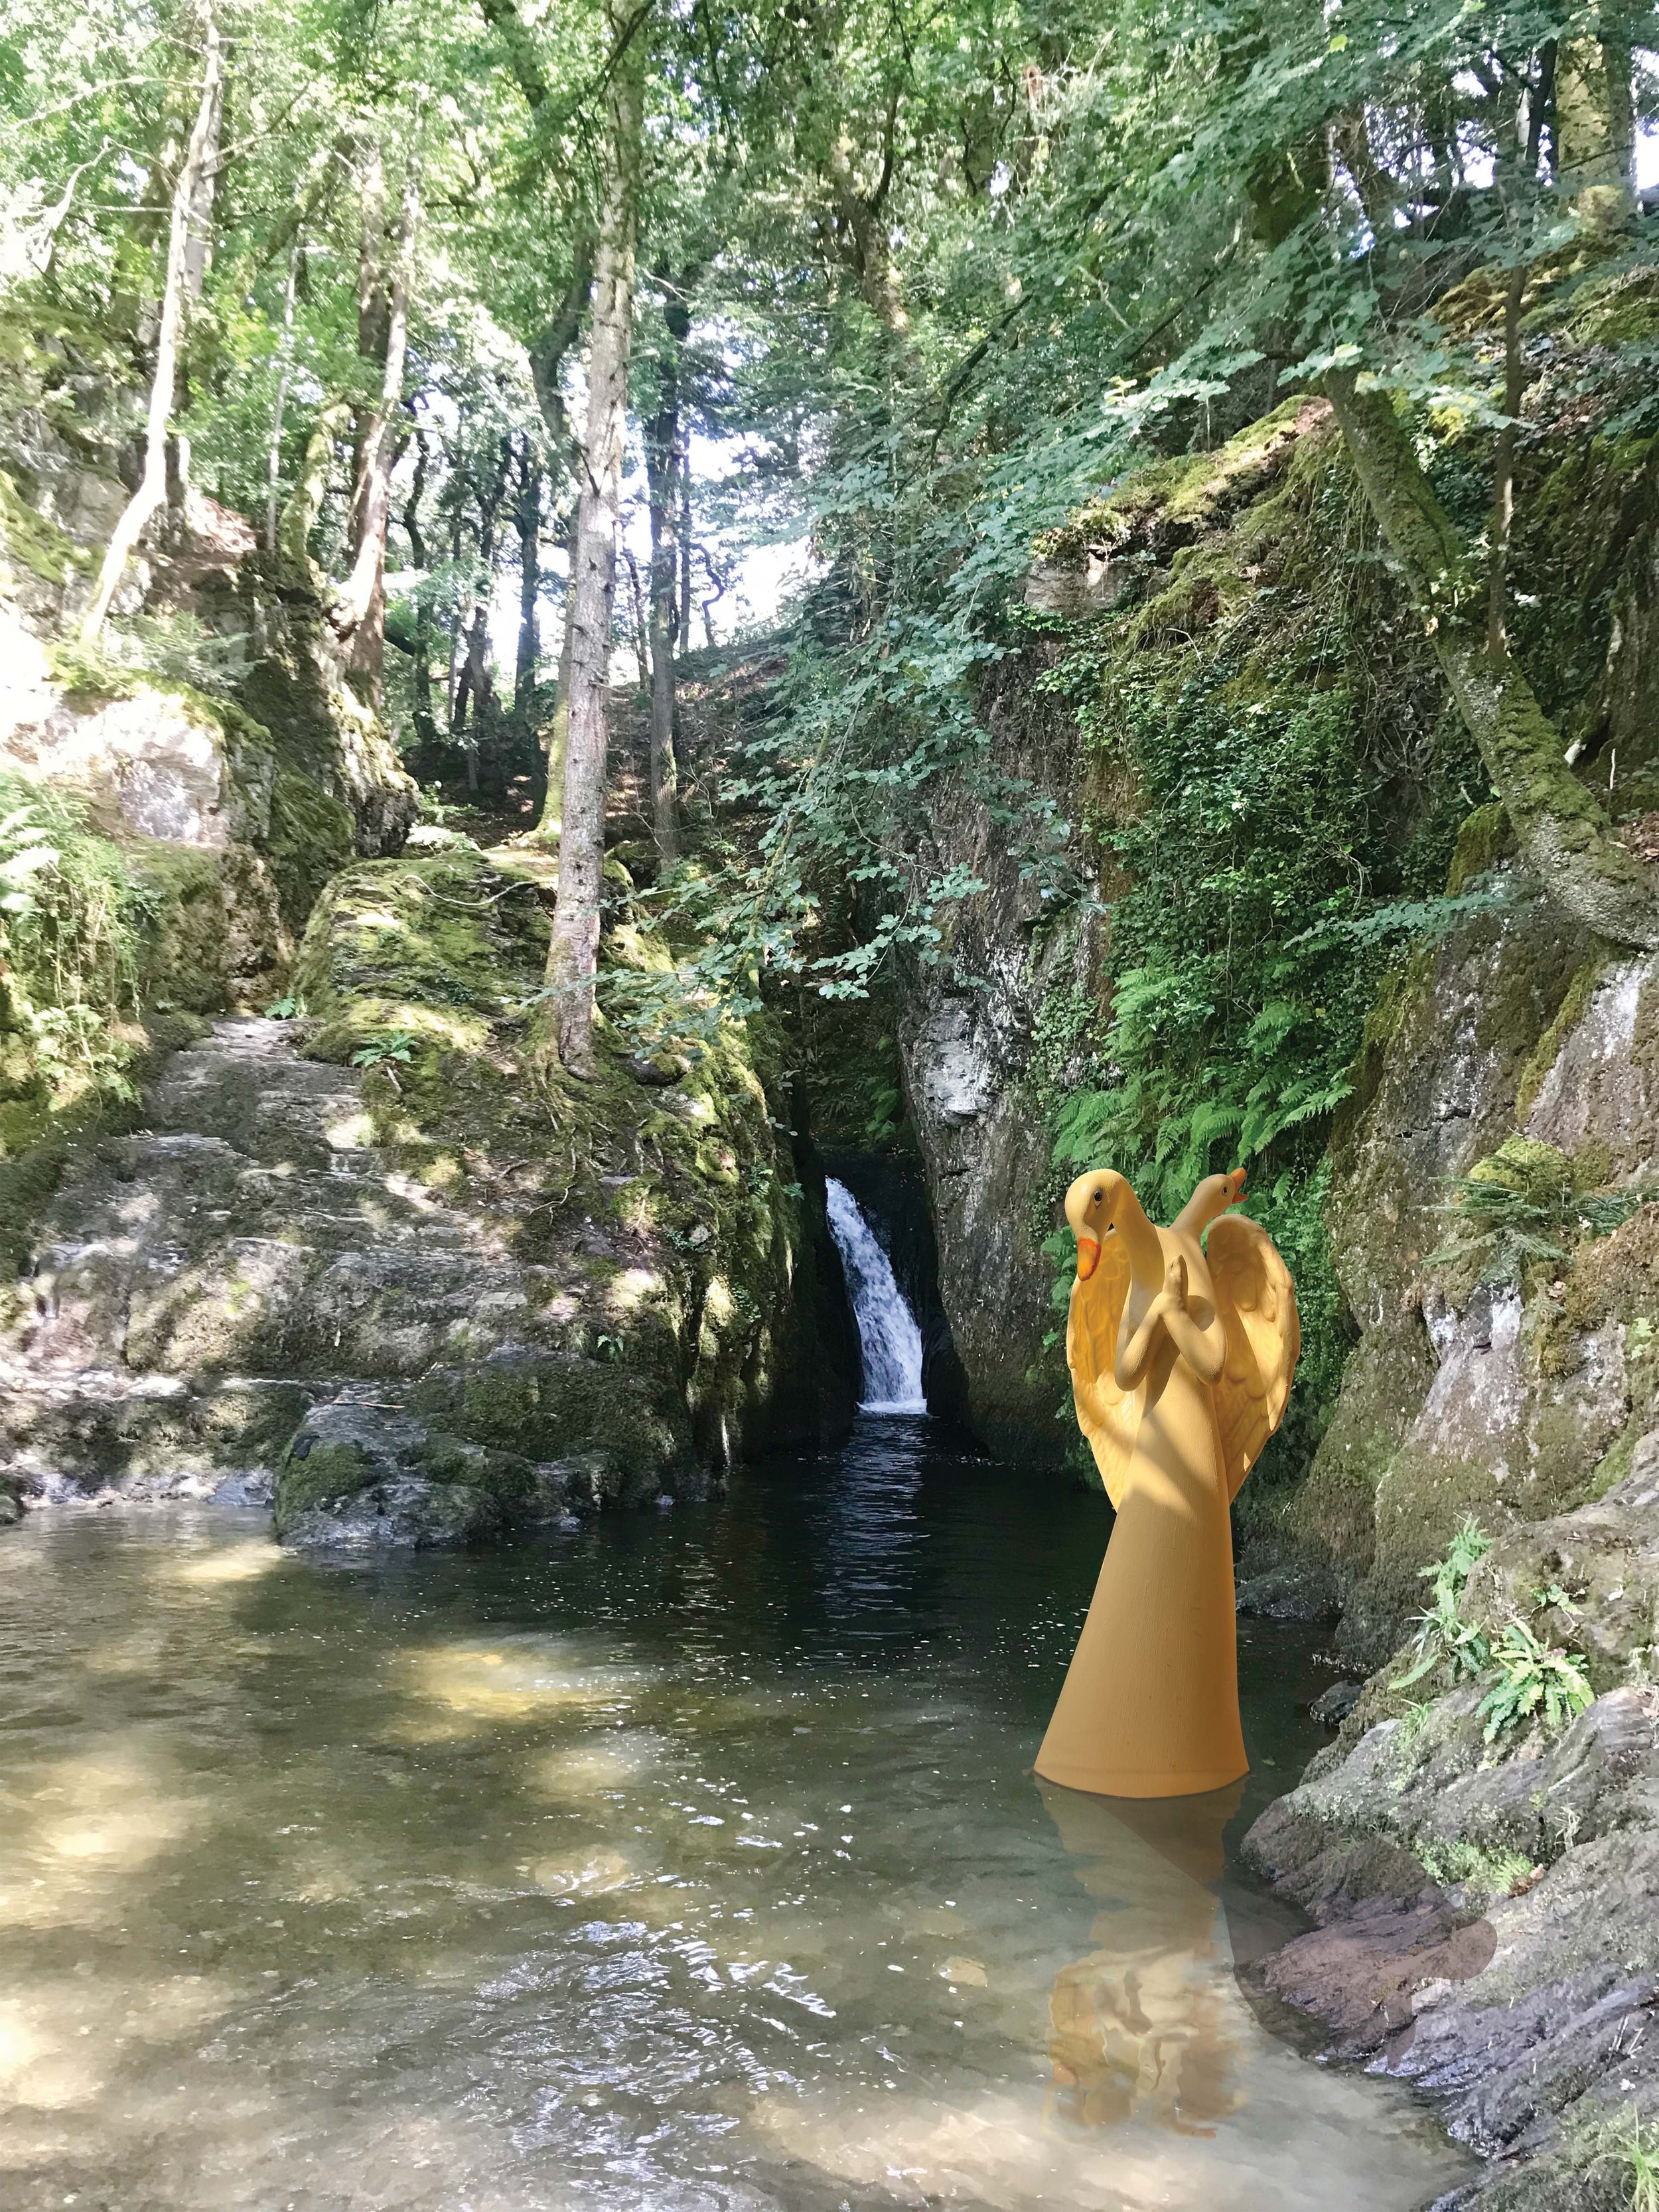 if nature were our religion (waterfall)